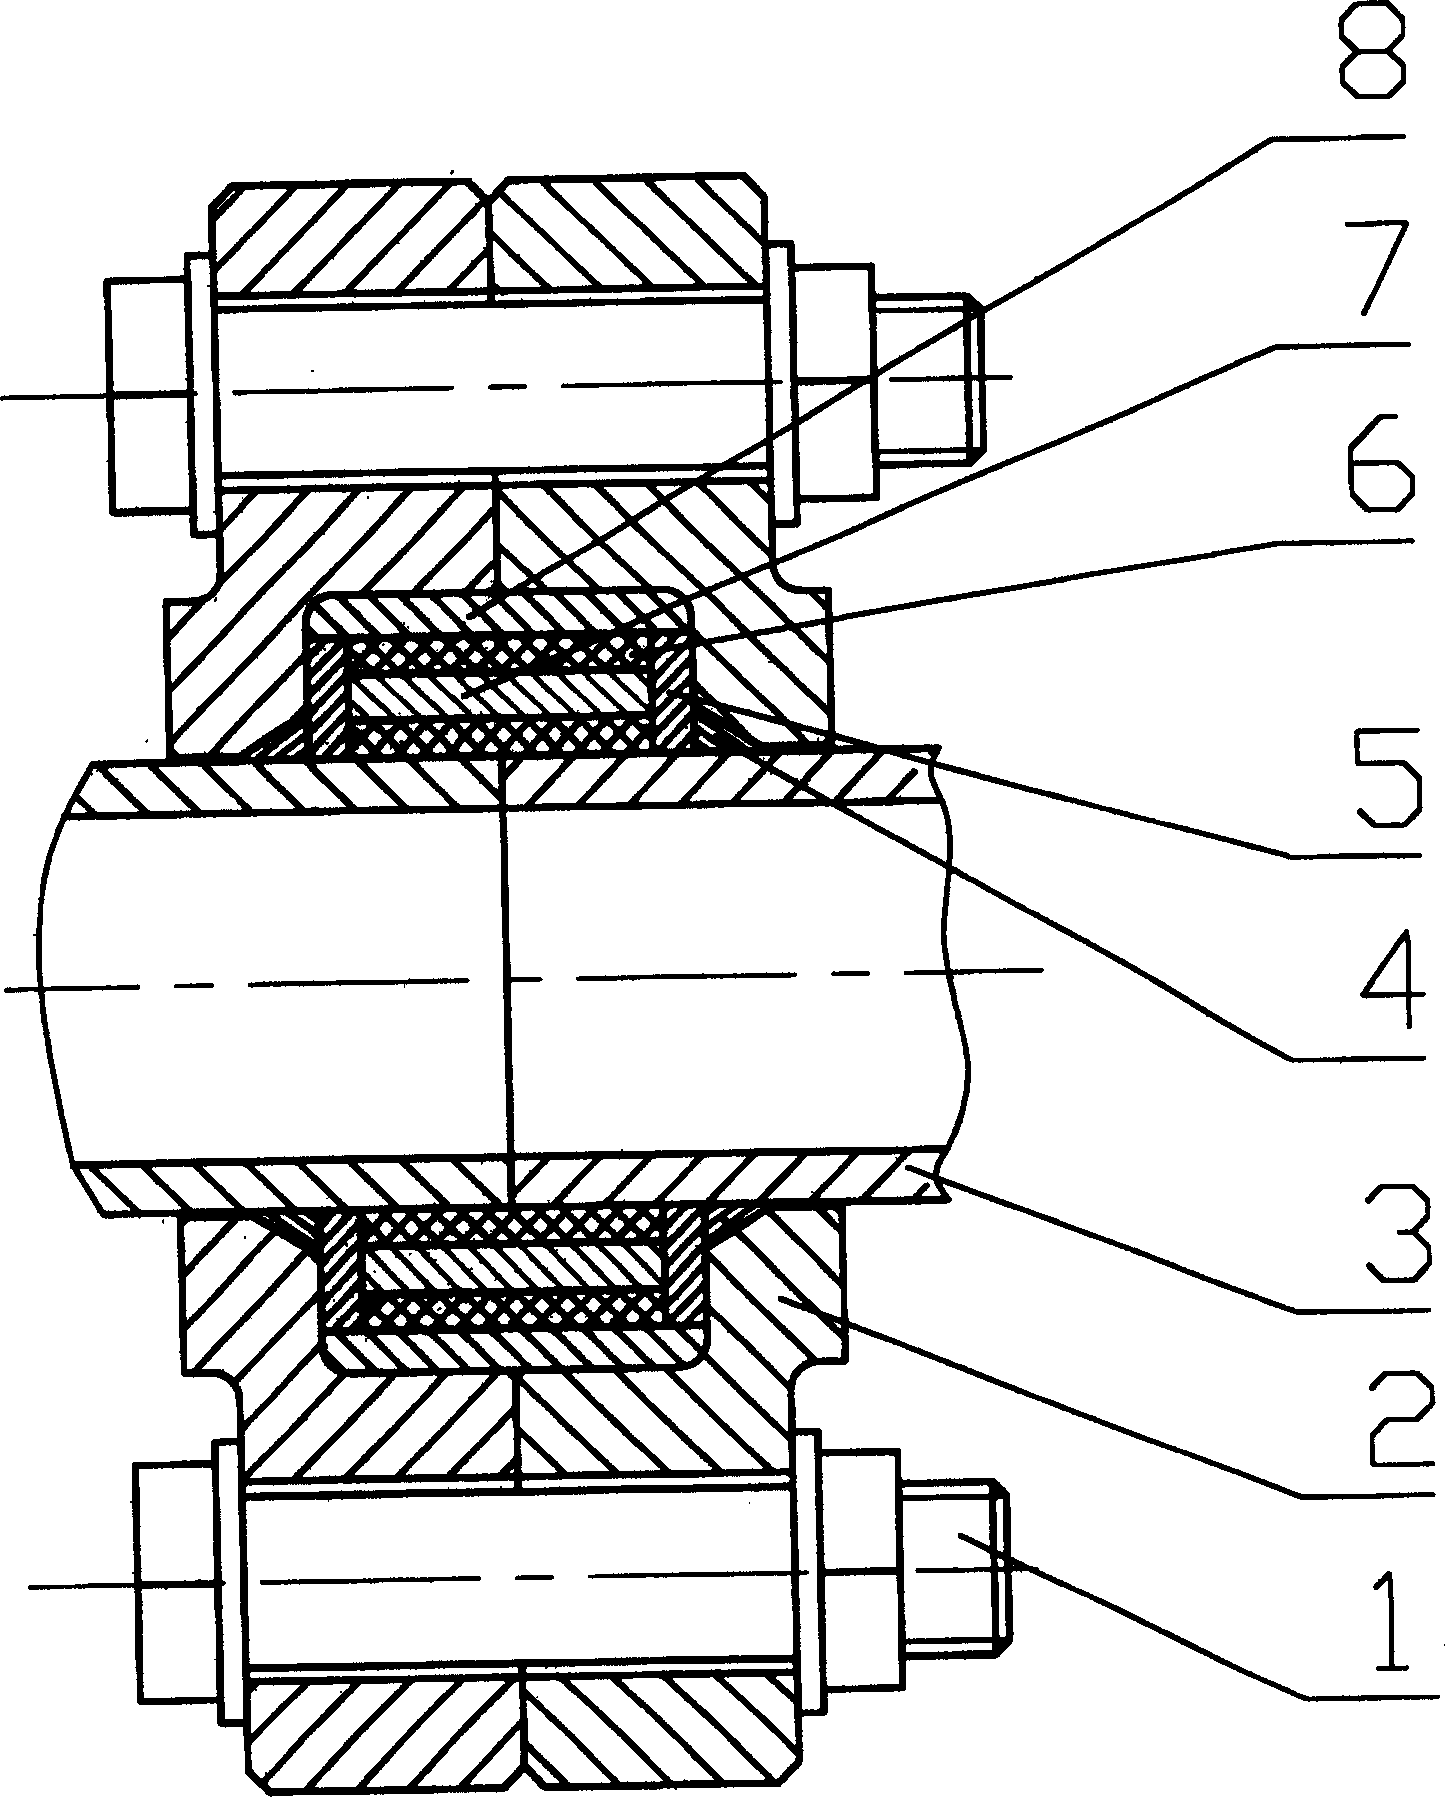 Fast connecting flange